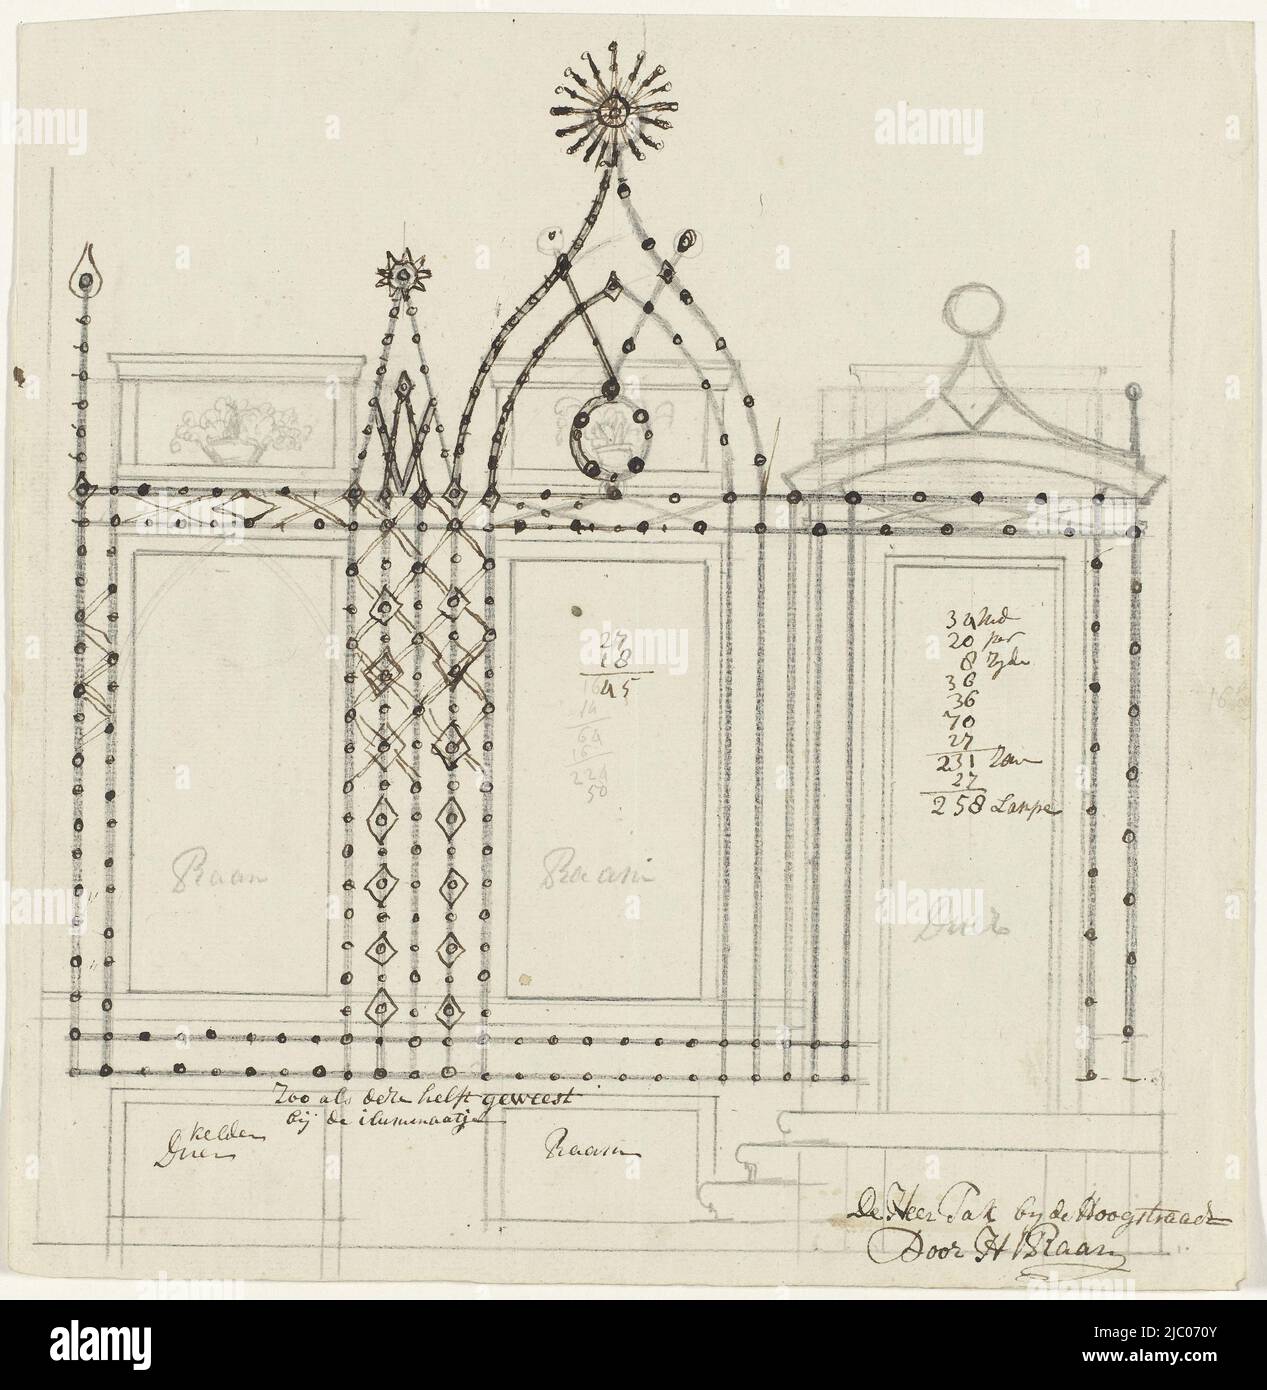 Design for the illumination of the house of Mr. Tak in the Hoogstraat in Amsterdam. With notes on placement and quantities of lamps. Part of a group of design drawings by the architect Hendrik G. van Raan for illuminations and decorations in Amsterdam on the 40th birthday of Prince Willem V on March 8, 1788., Design for the illumination of the house of Mr. Tak in Amsterdam, 1788., draughtsman: Hendrik G. van Raan, (mentioned on object), Amsterdam, 1788, paper, writing (processes), h 273 mm × w 267 mm Stock Photo